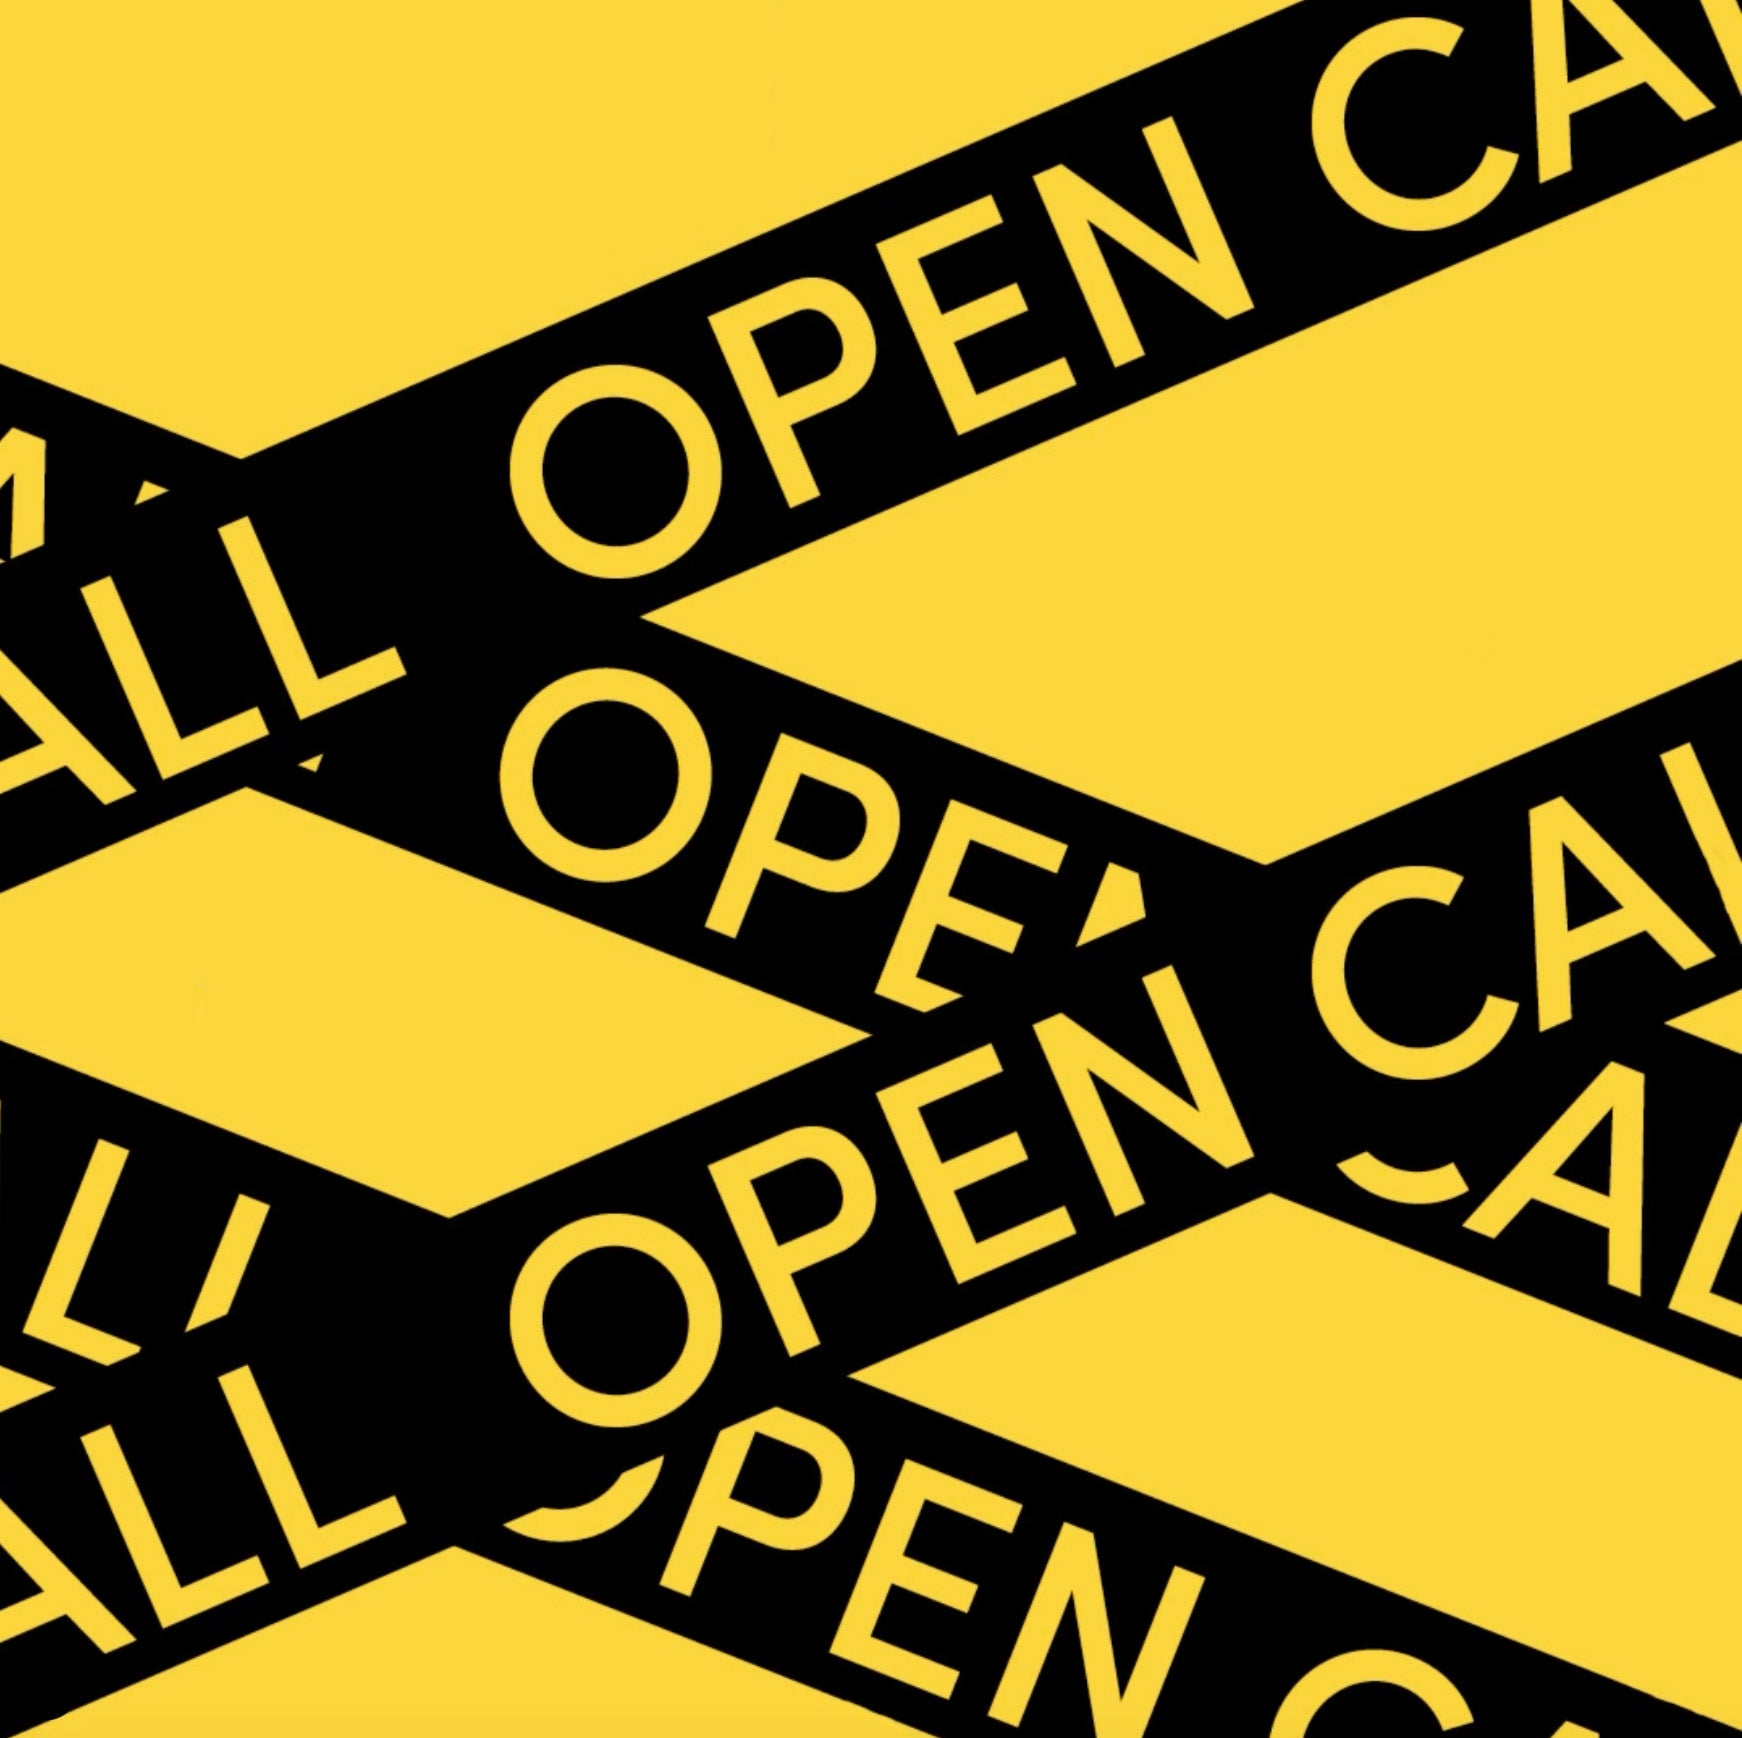 Woolwich Contemporary Print Fair Open Call